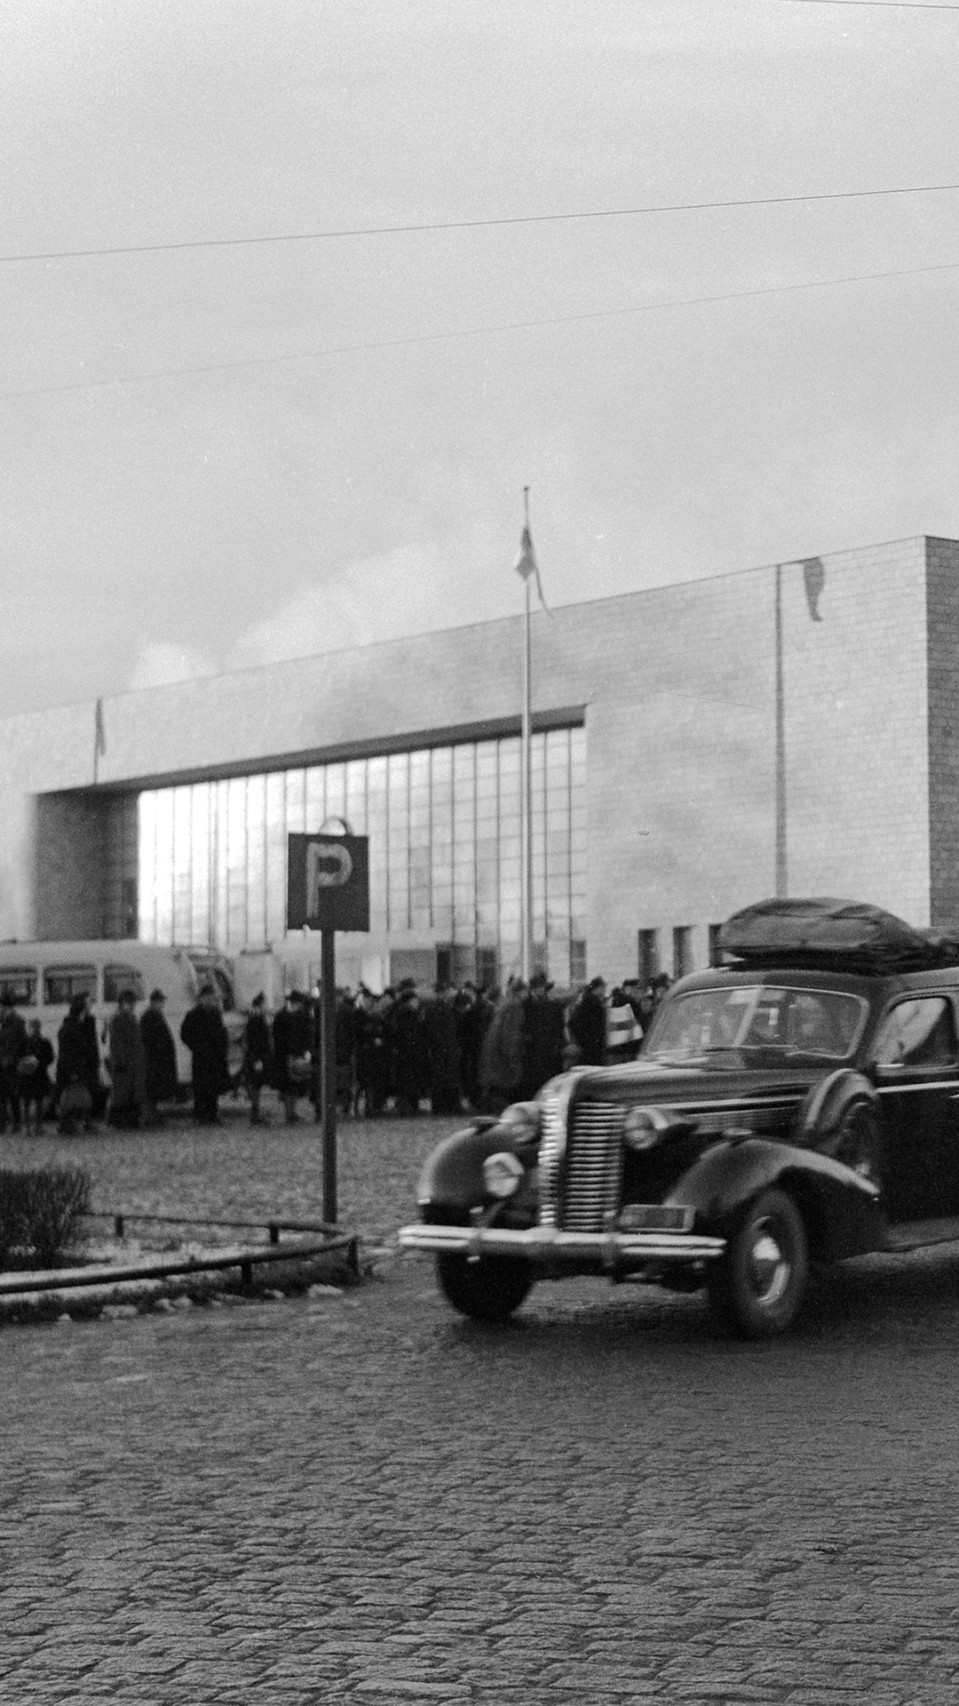 The President of the Republic had gathered at the train station to receive a heavy crowd in 1943. A black car